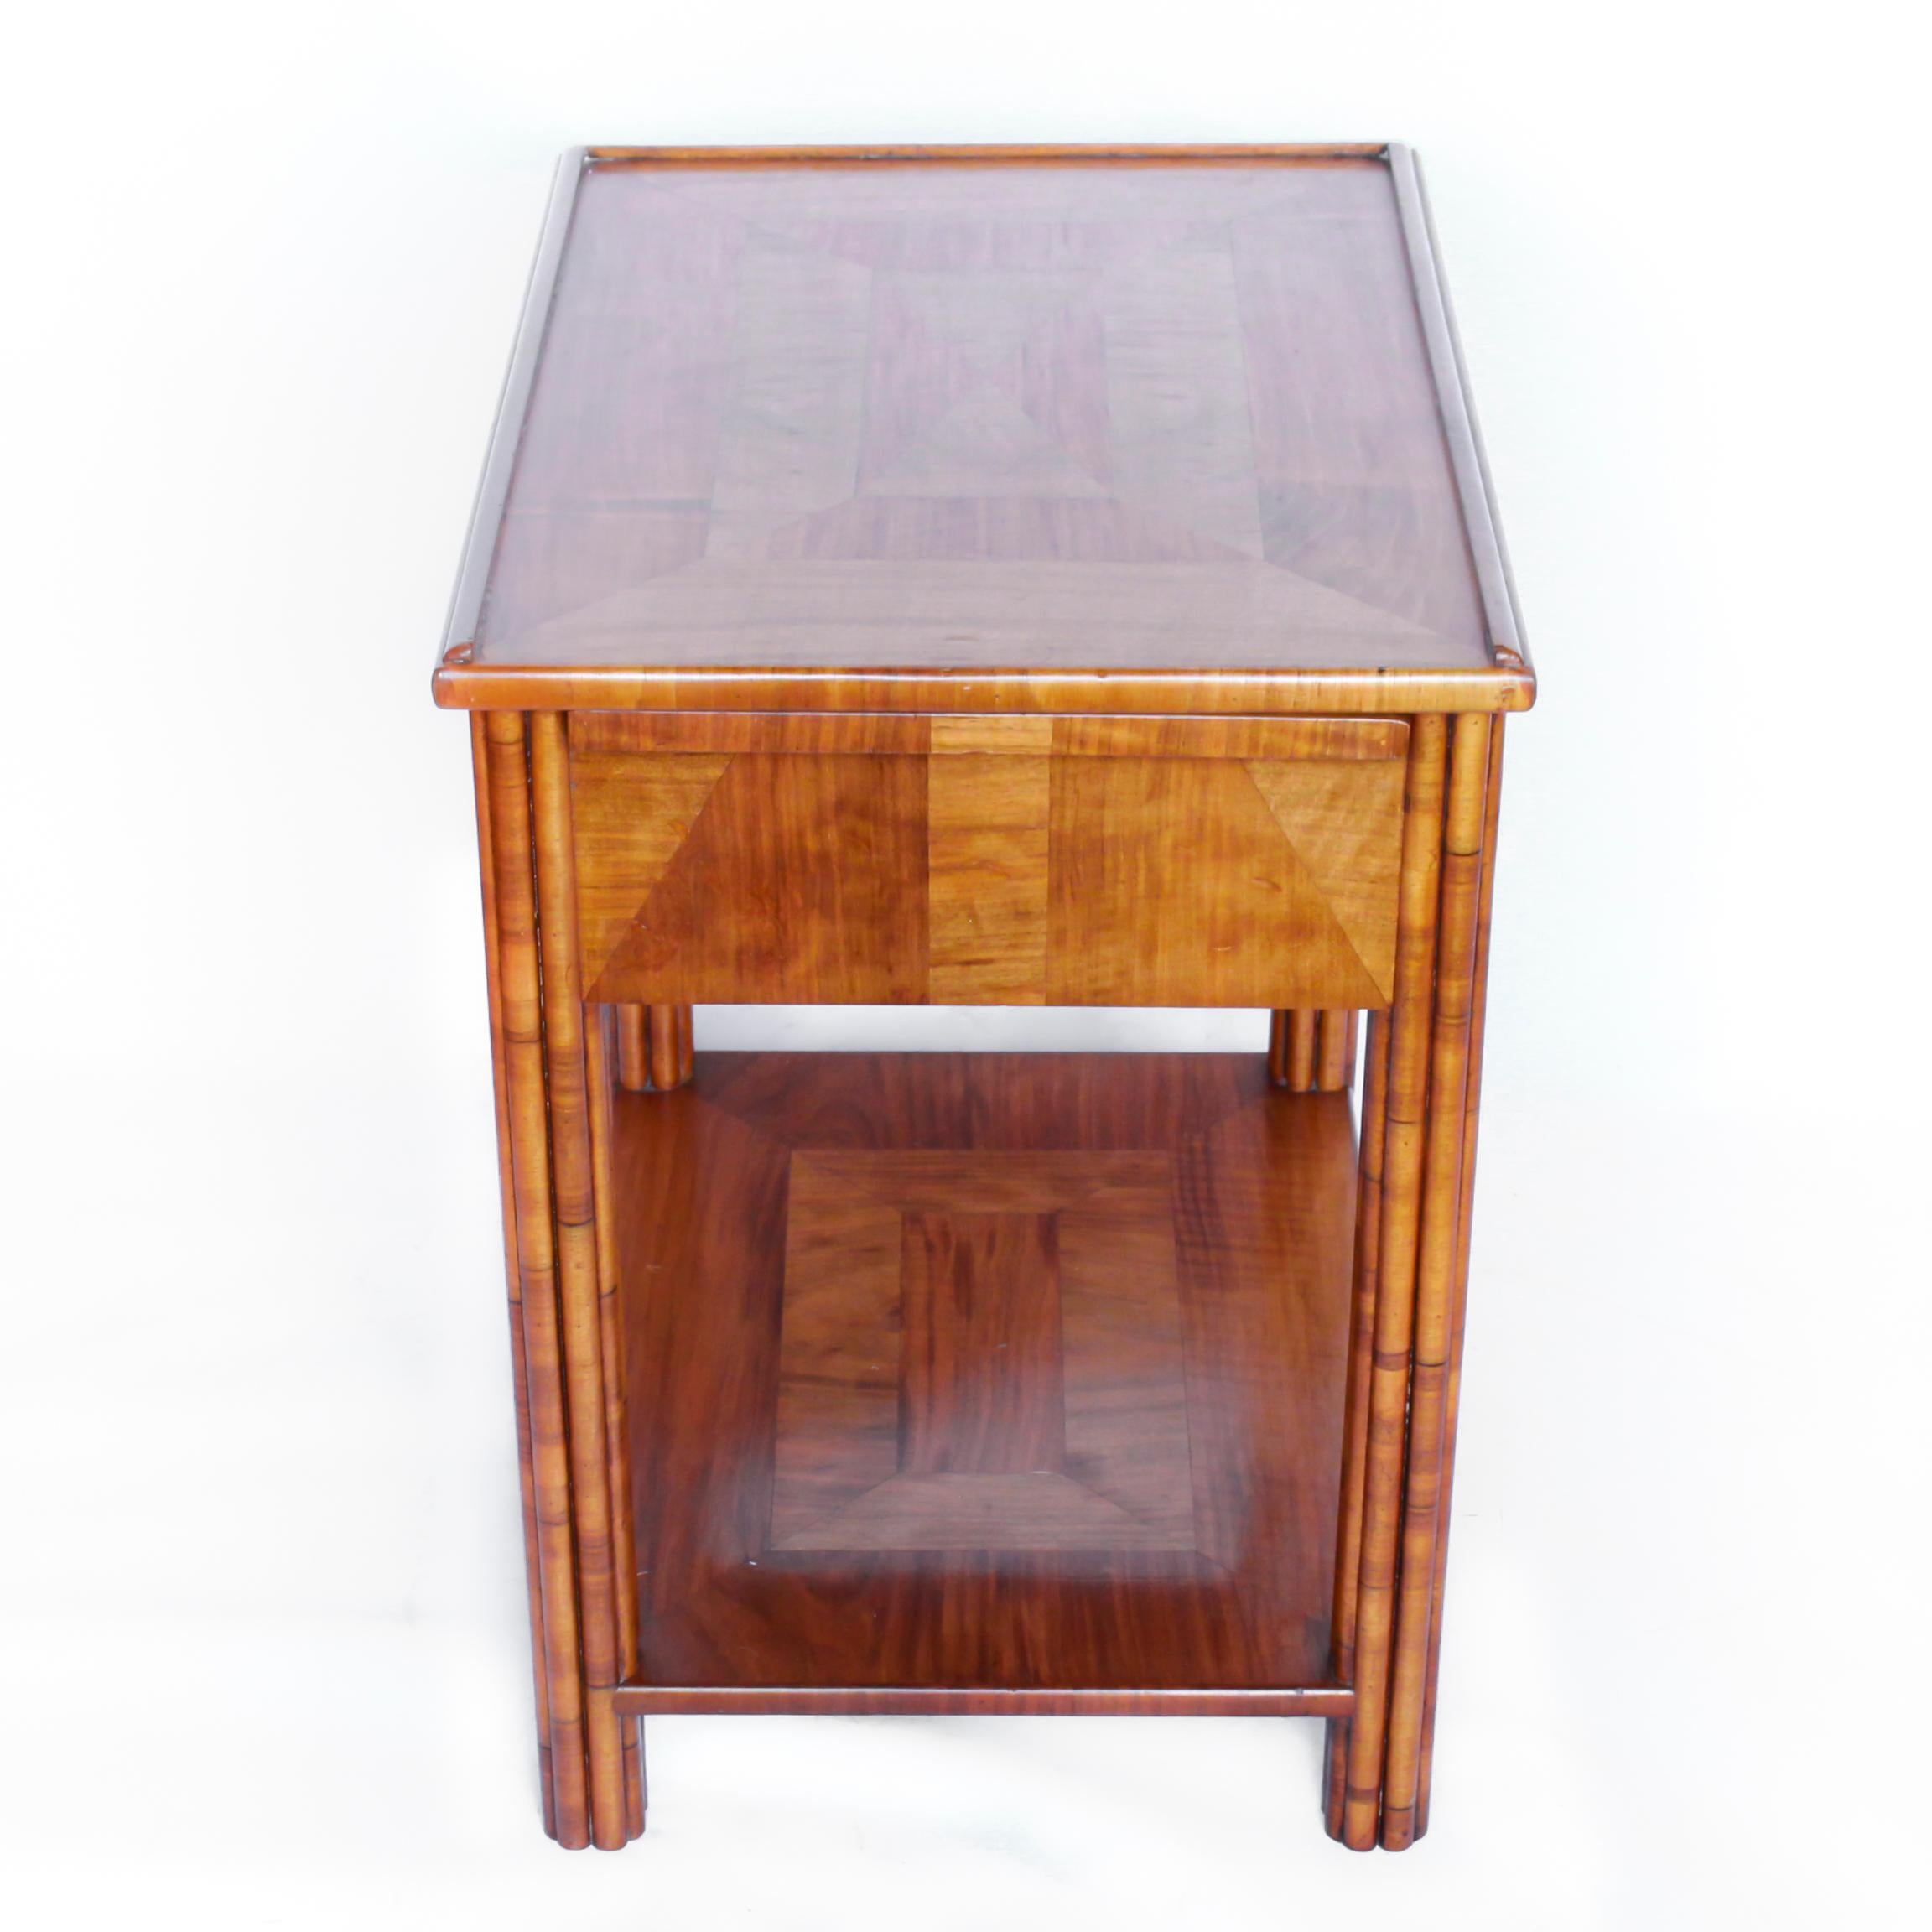 Art Deco Occasional Table Walnut with Sliding Tray and Integral Drawer 1930's 4